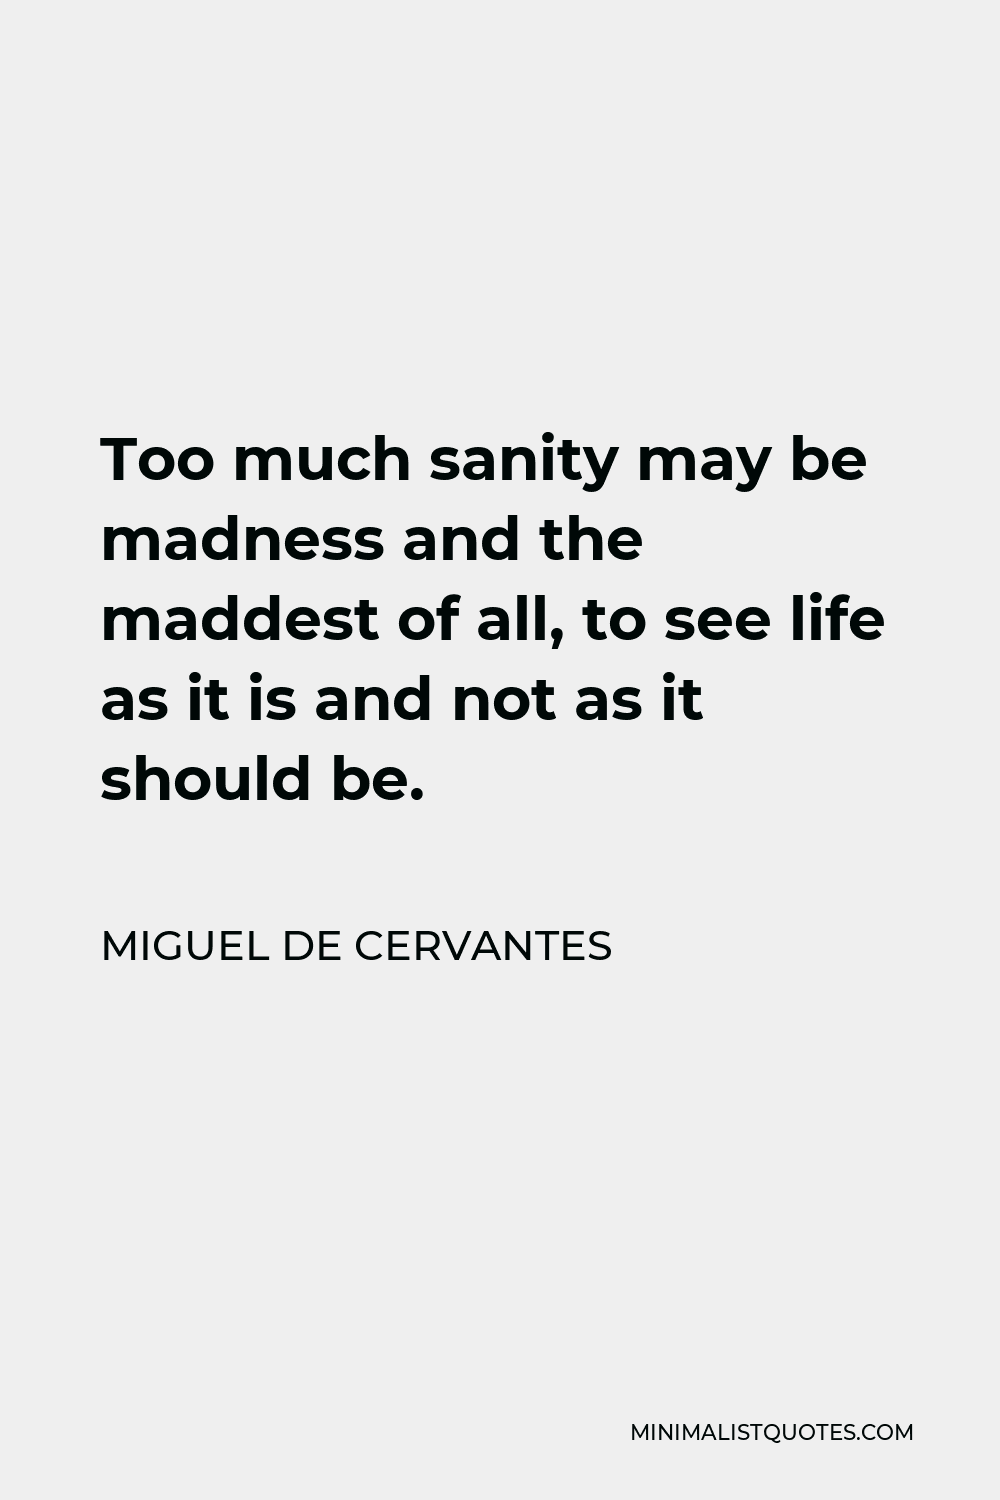 Miguel de Cervantes Quote - Too much sanity may be madness and the maddest of all, to see life as it is and not as it should be.